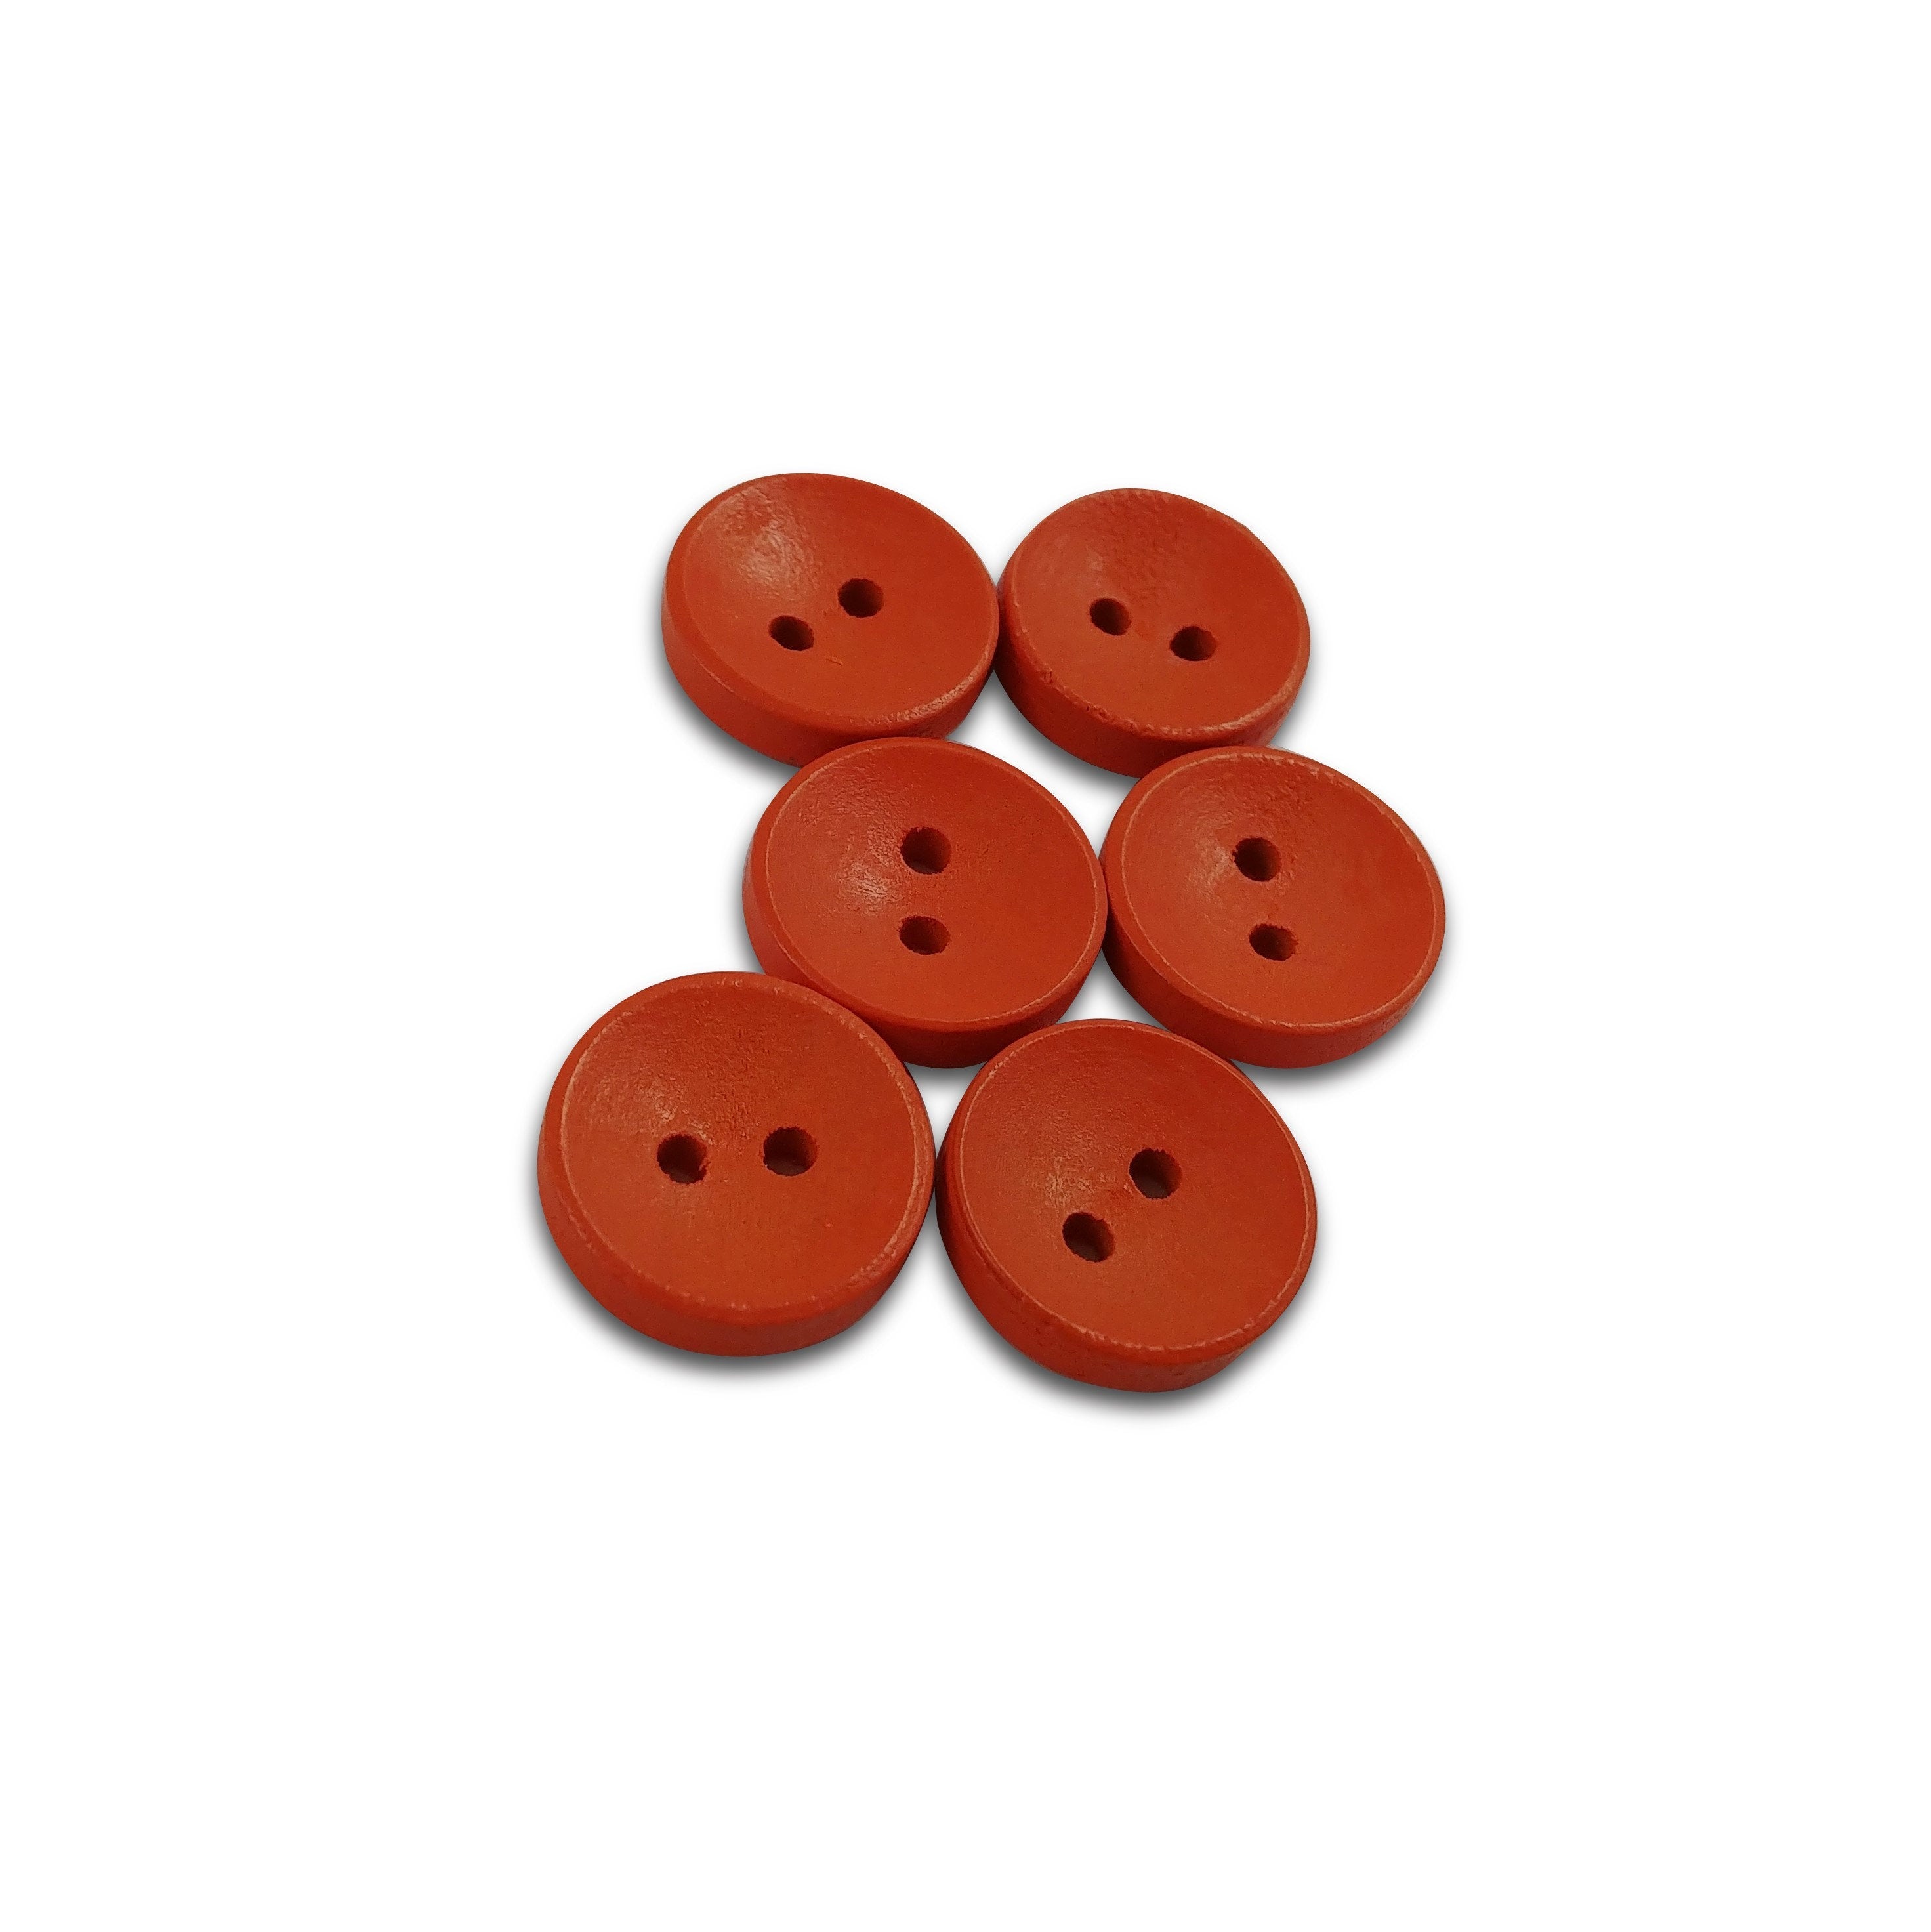 15mm wooden colorful buttons - Set of 6 wood button - Choose your color